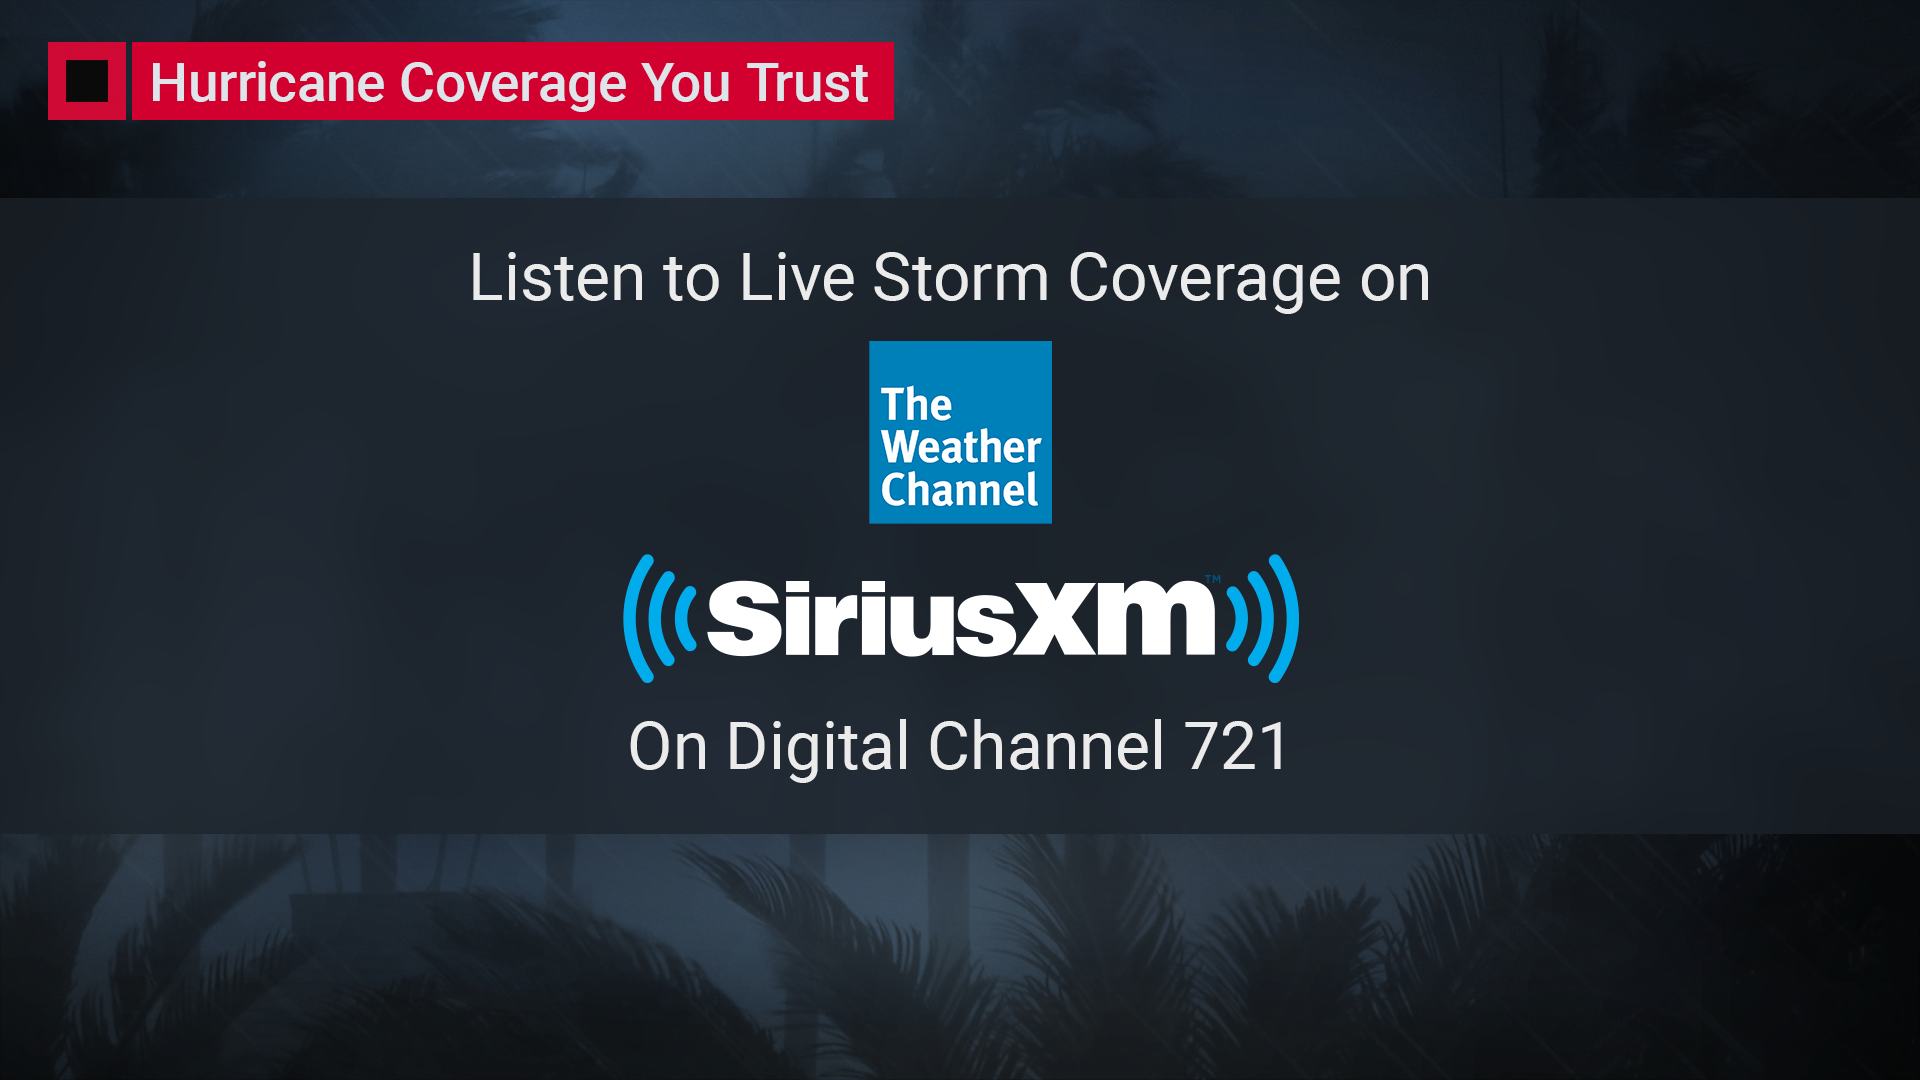 SiriusXM The Weather Channel Hurricane Coverage